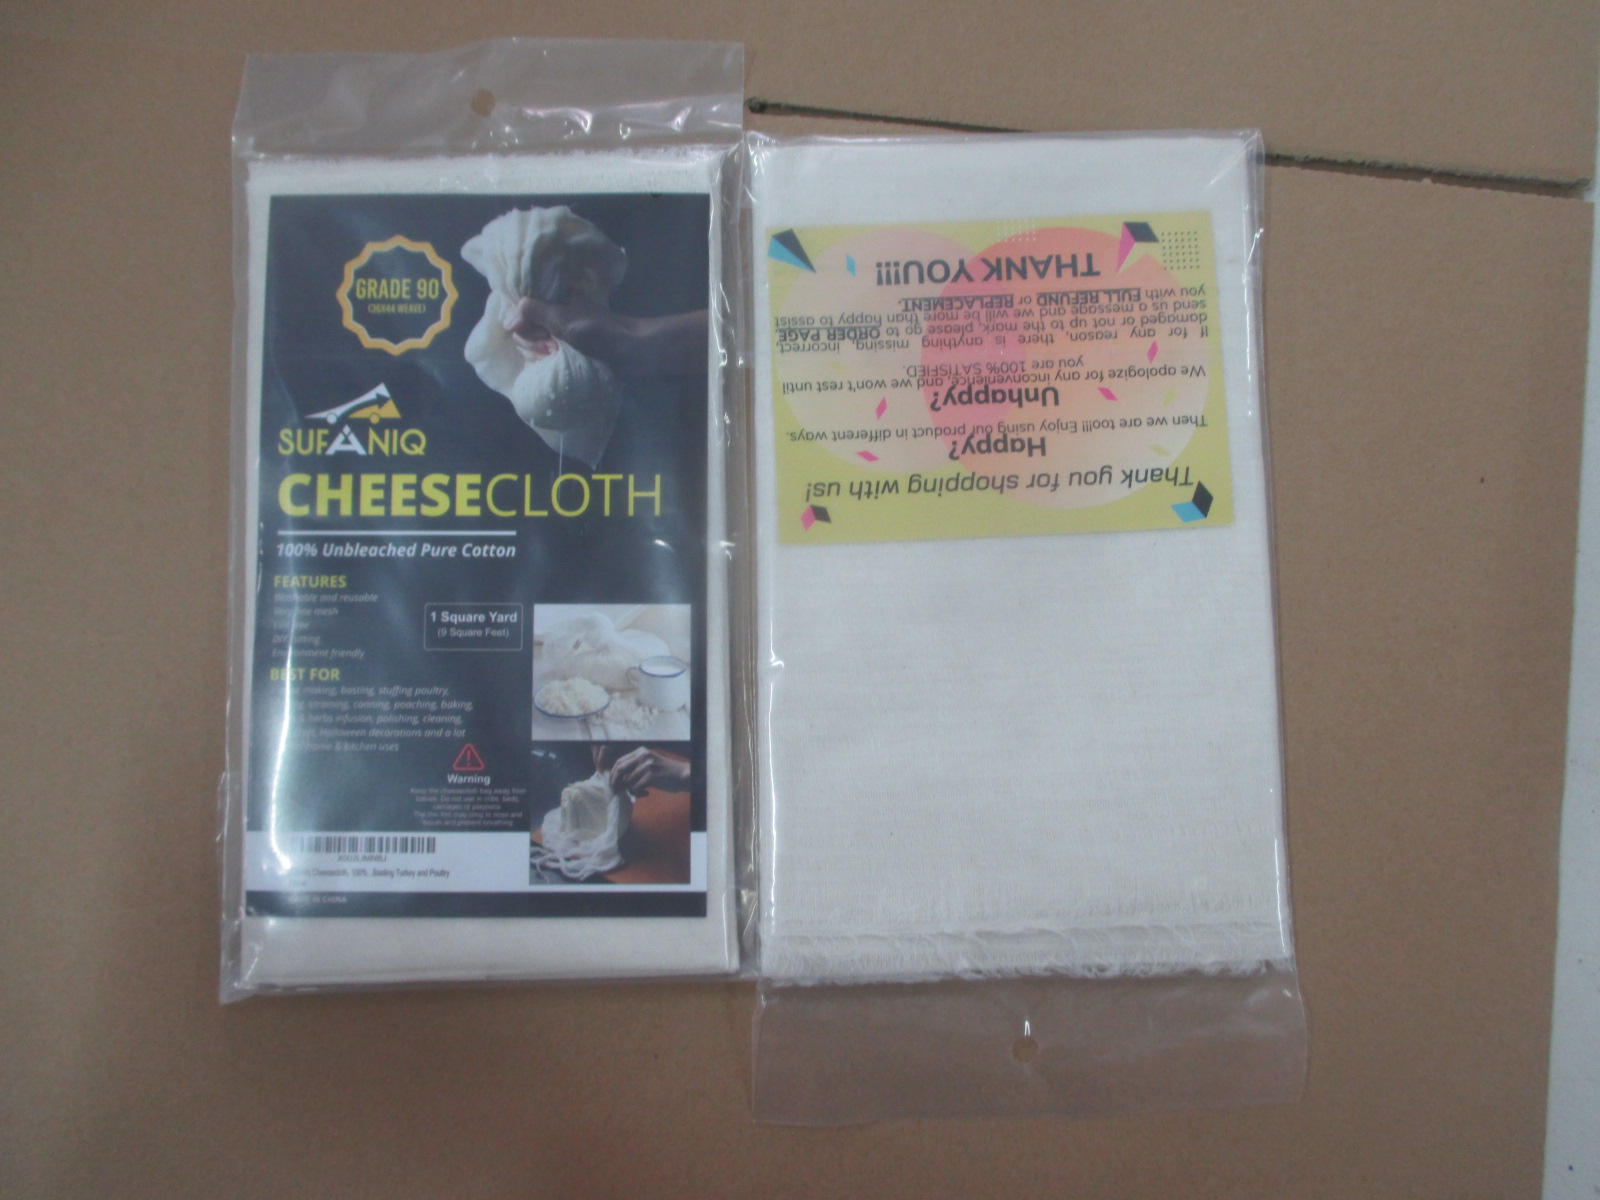 Third Party Inspection Service Standards And Methods for Inspection of Cheesecloth Made-in-china Product Inspection Service